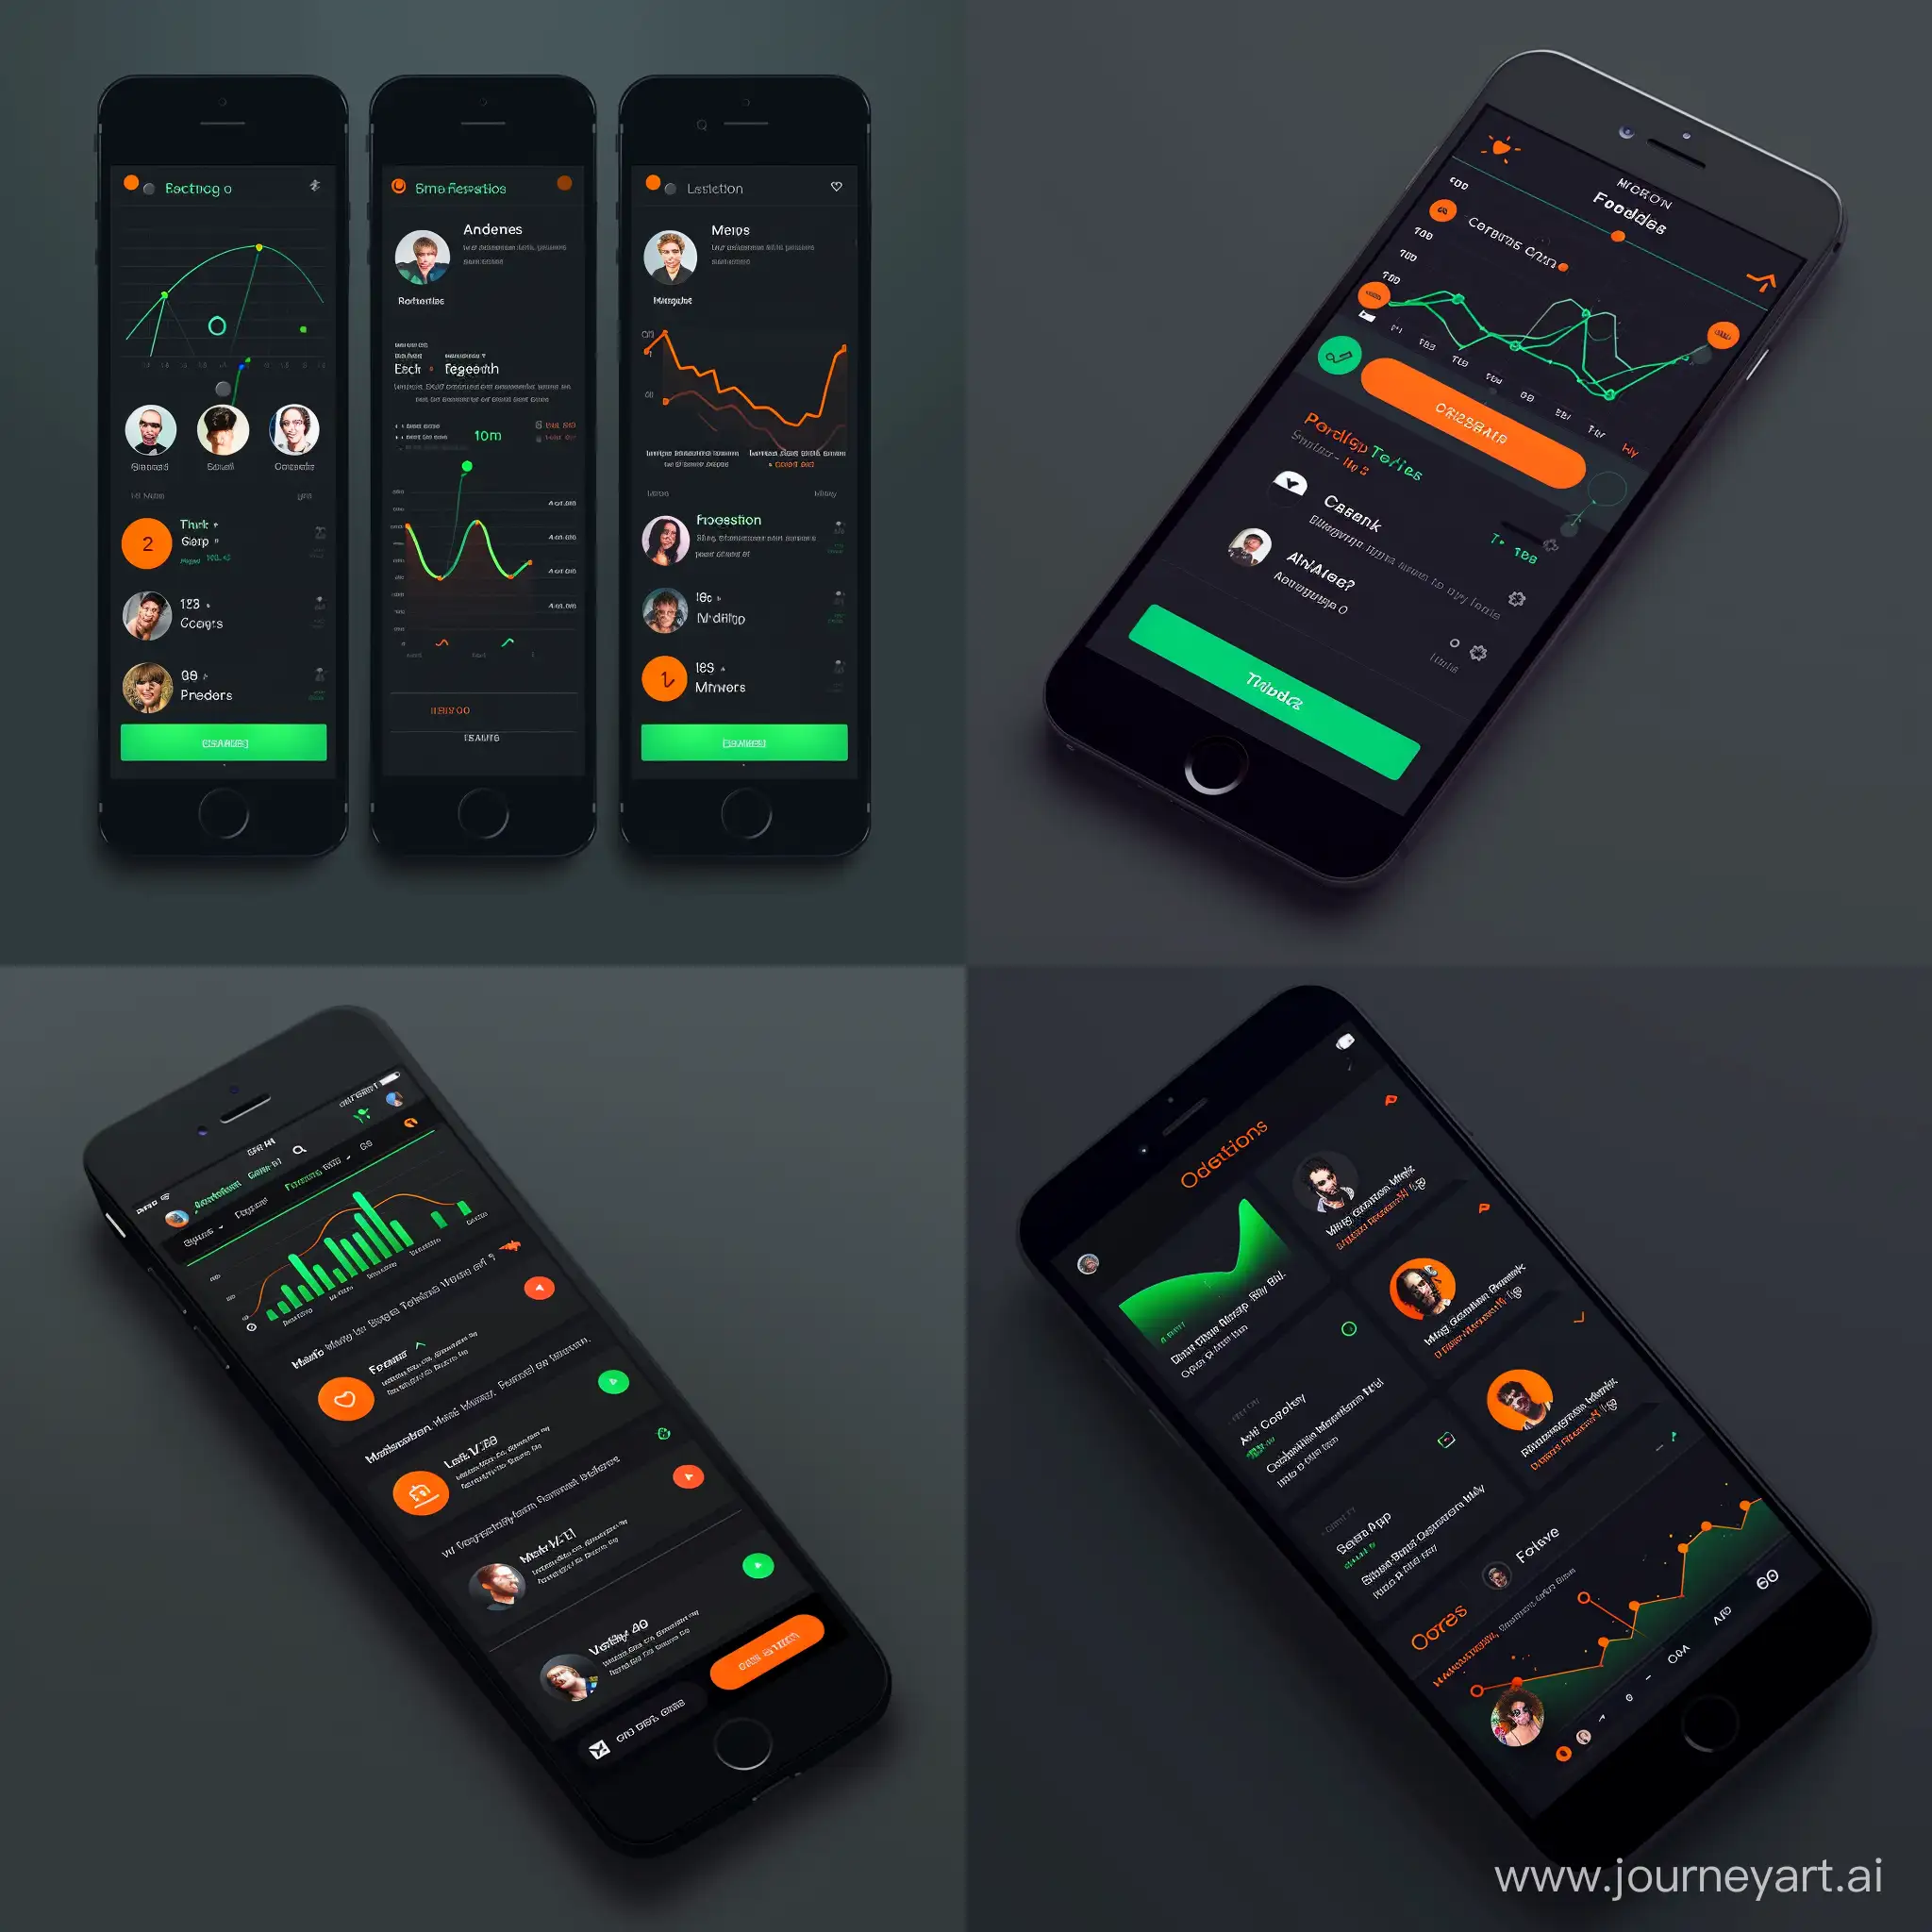 TechInspired-iOS-App-with-Dark-Theme-Green-Accents-and-Graph-Display